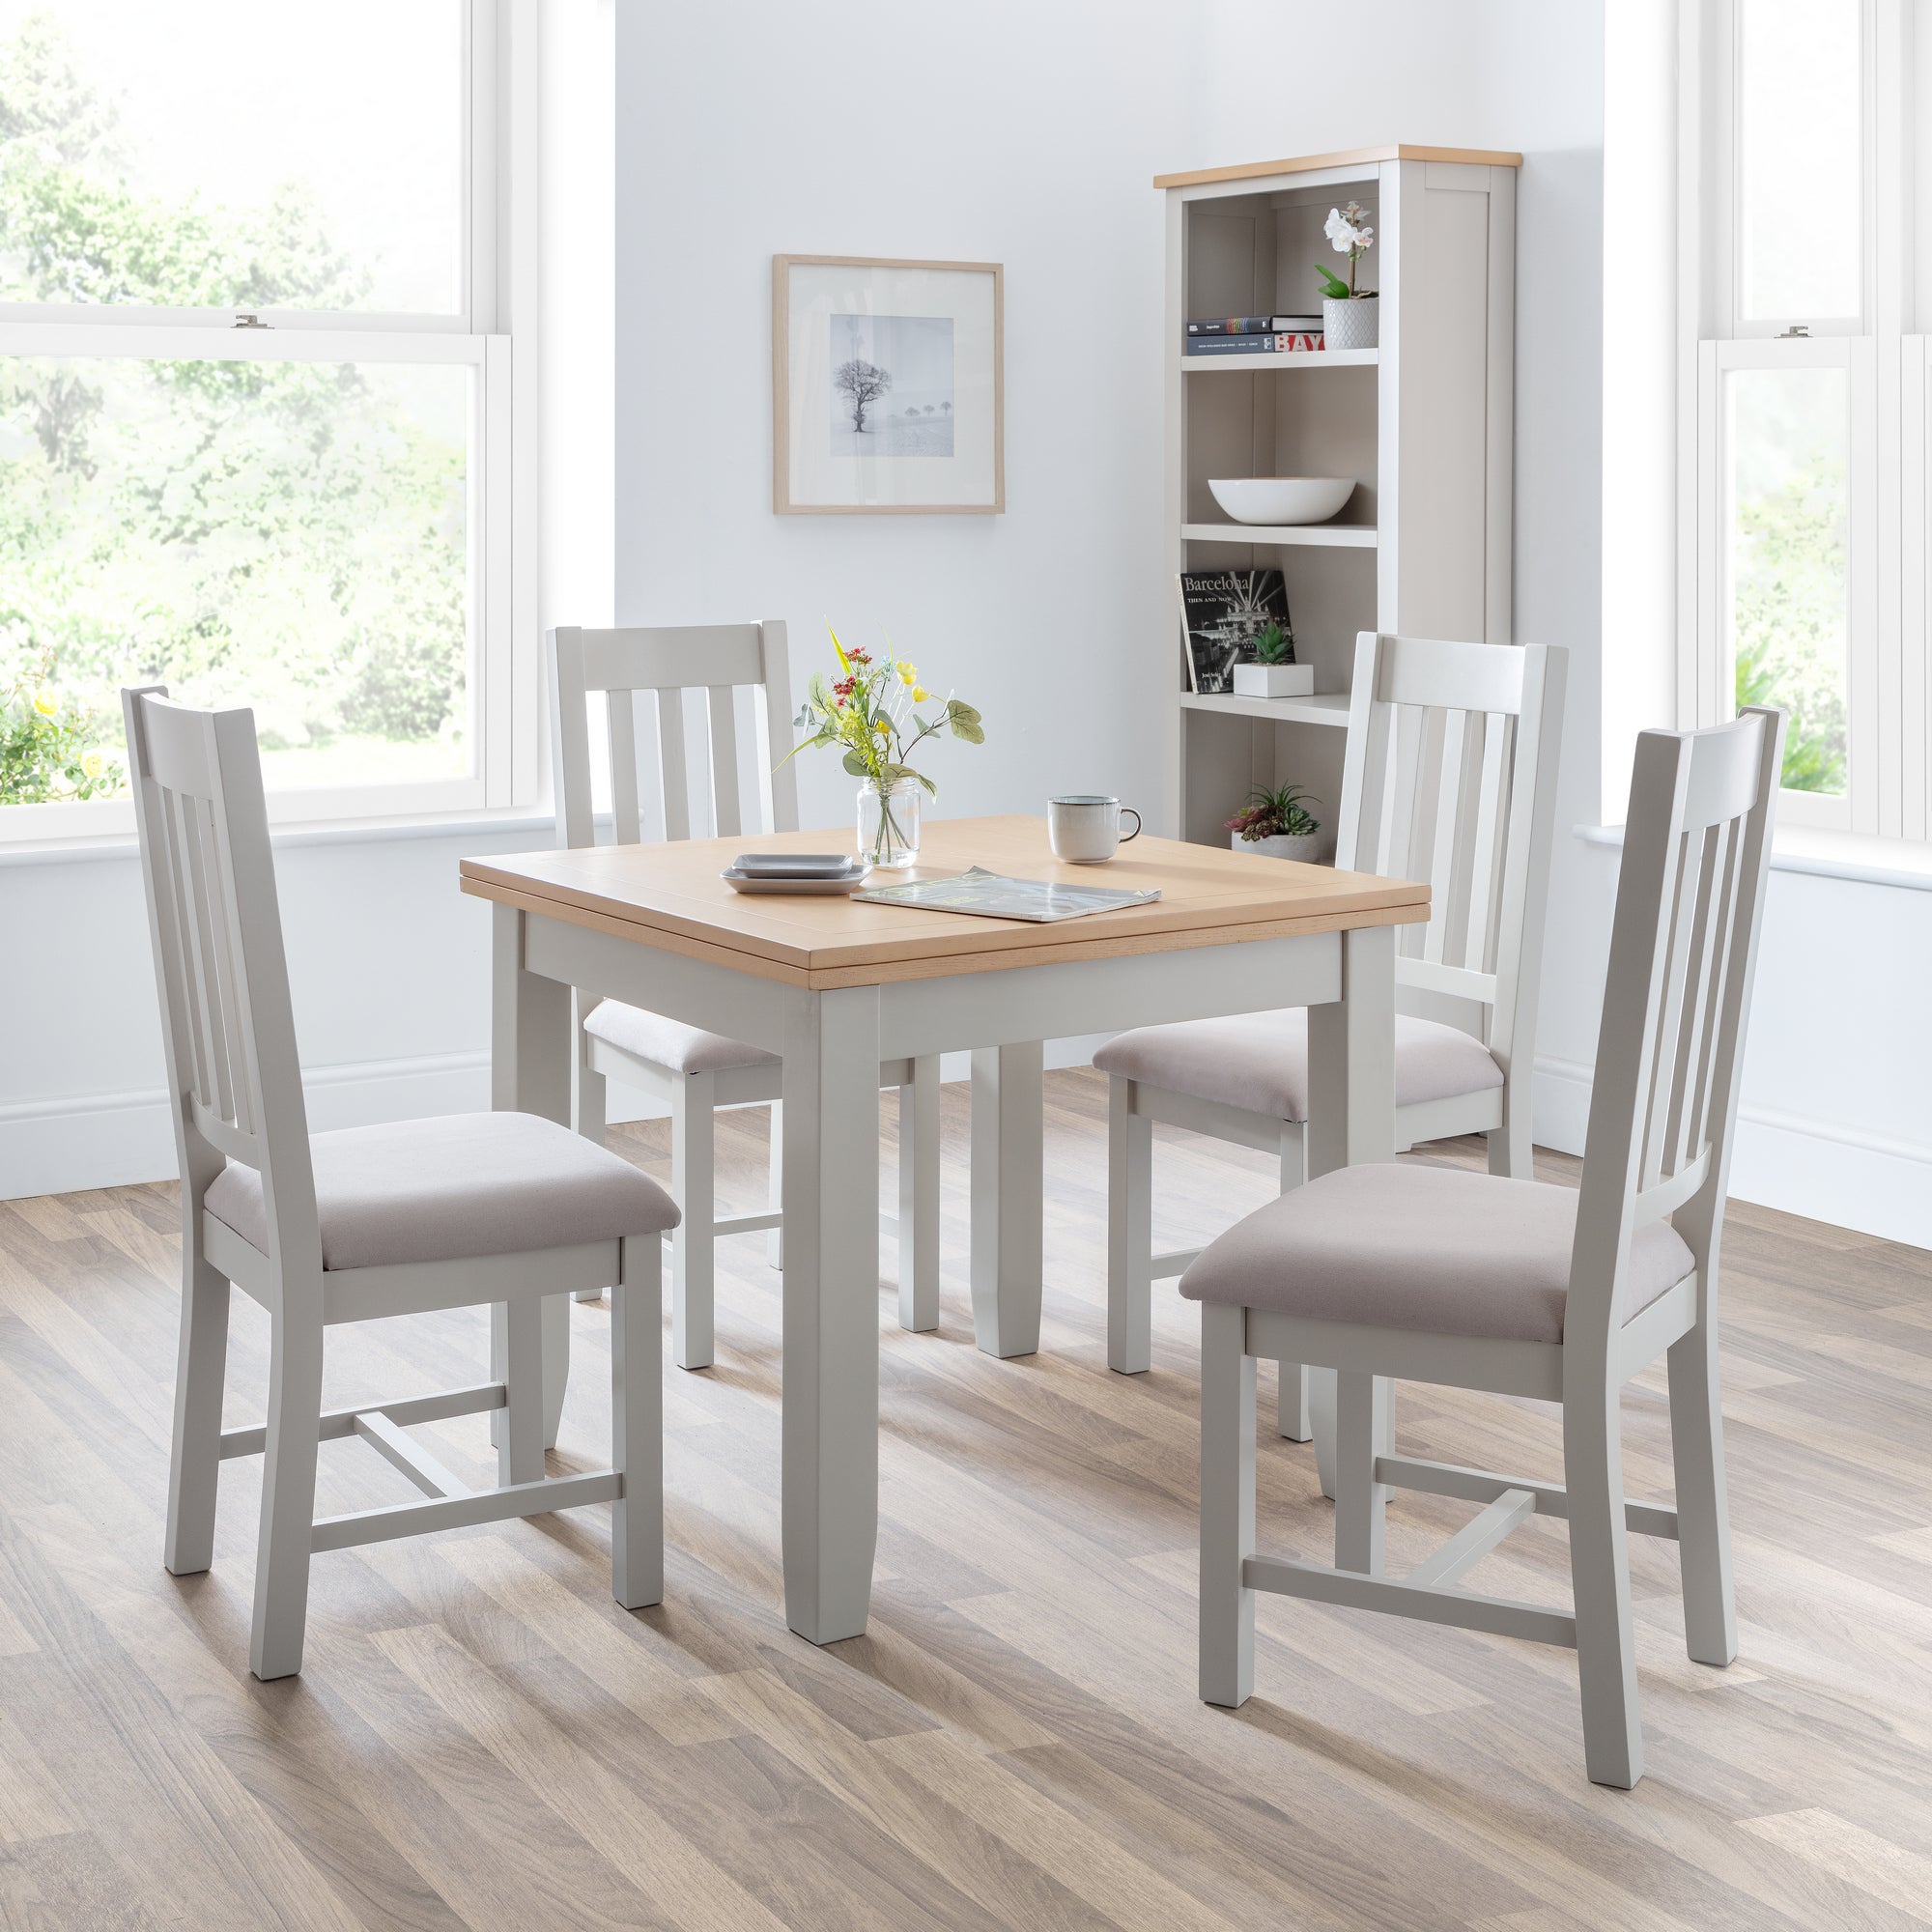 Richmond Square Flip Top Table With 4 Dining Chairs Grey Grey